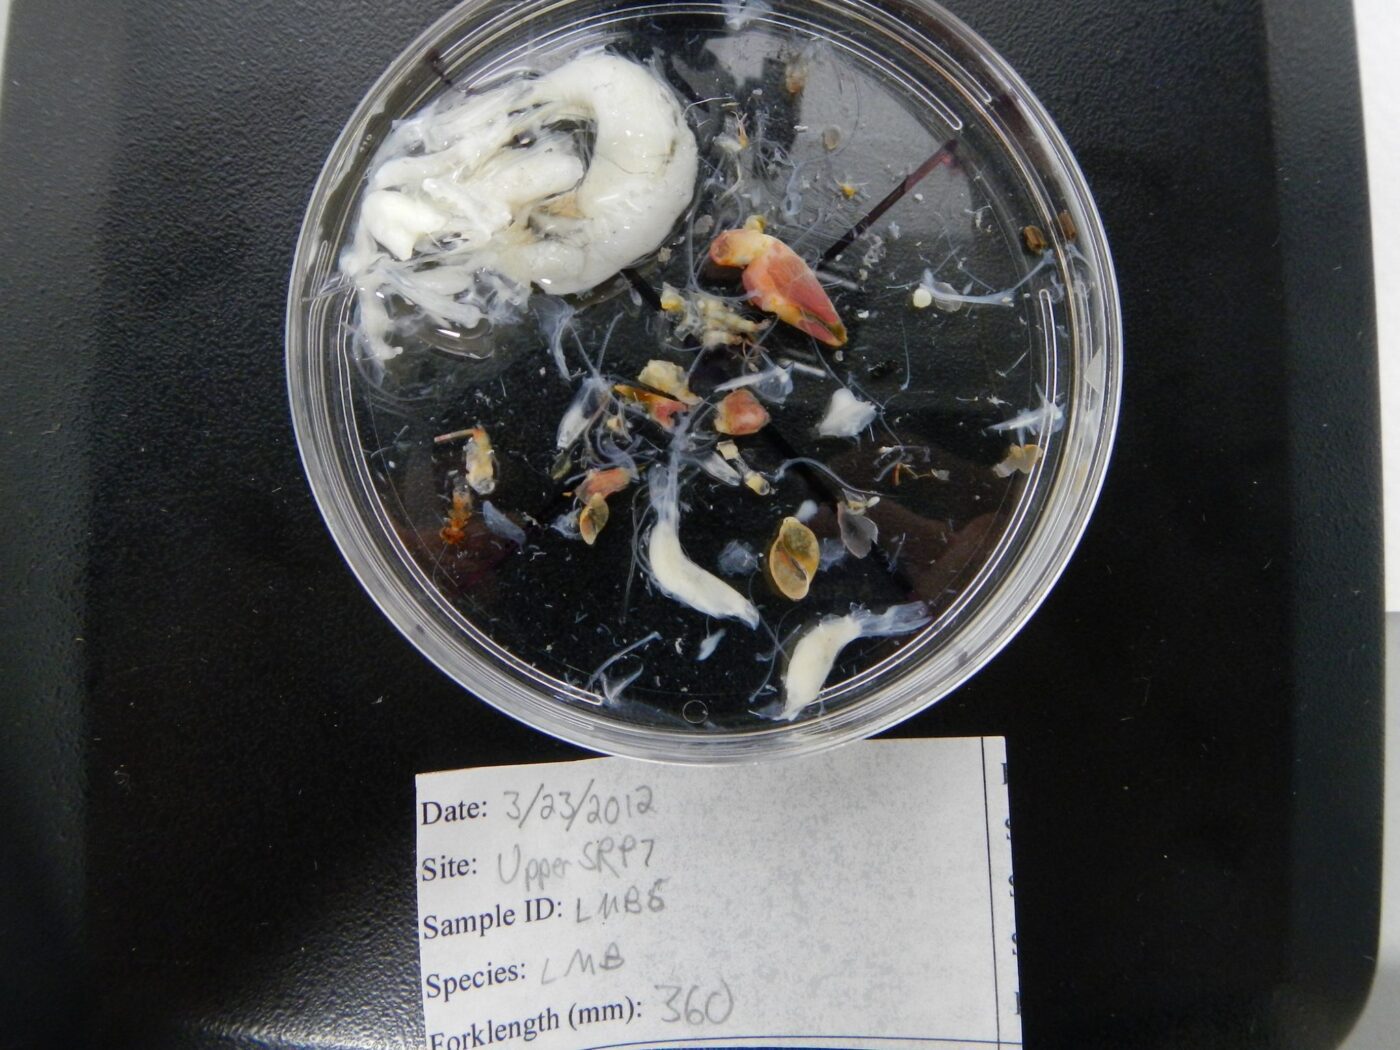 A petri dish filled with stomach contents of a fish on top of a black background with a white label